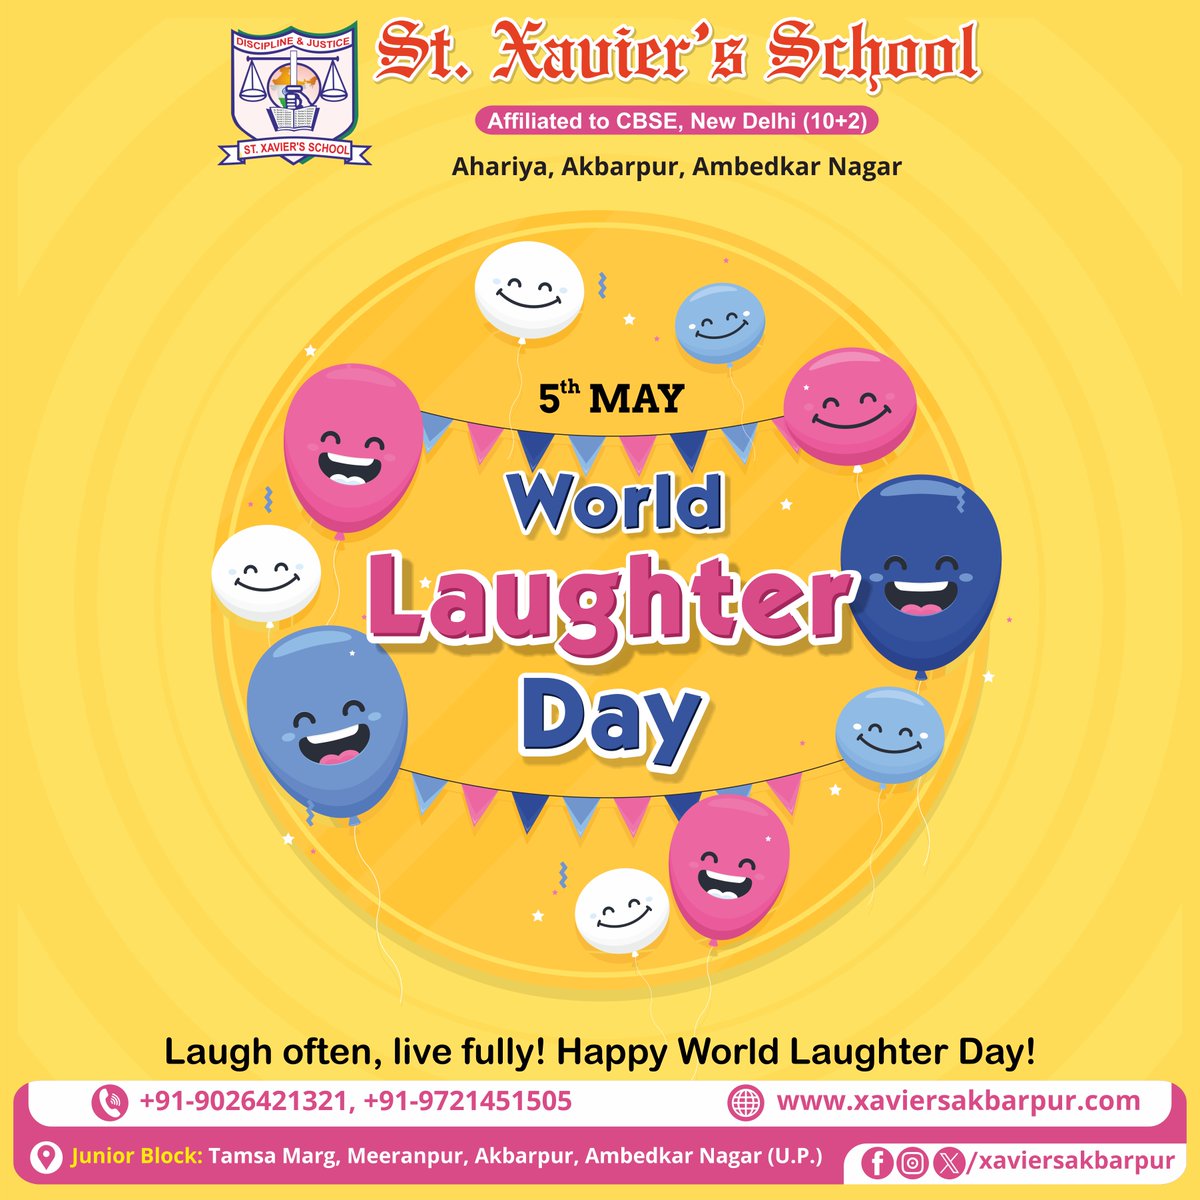 Laugh often, live fully! Happy World Laughter Day!

#WorldLaughterDay #LaughterDay #SpreadLaughter #LaughMore #LaughterIsTheBestMedicine #LaughterTherapy